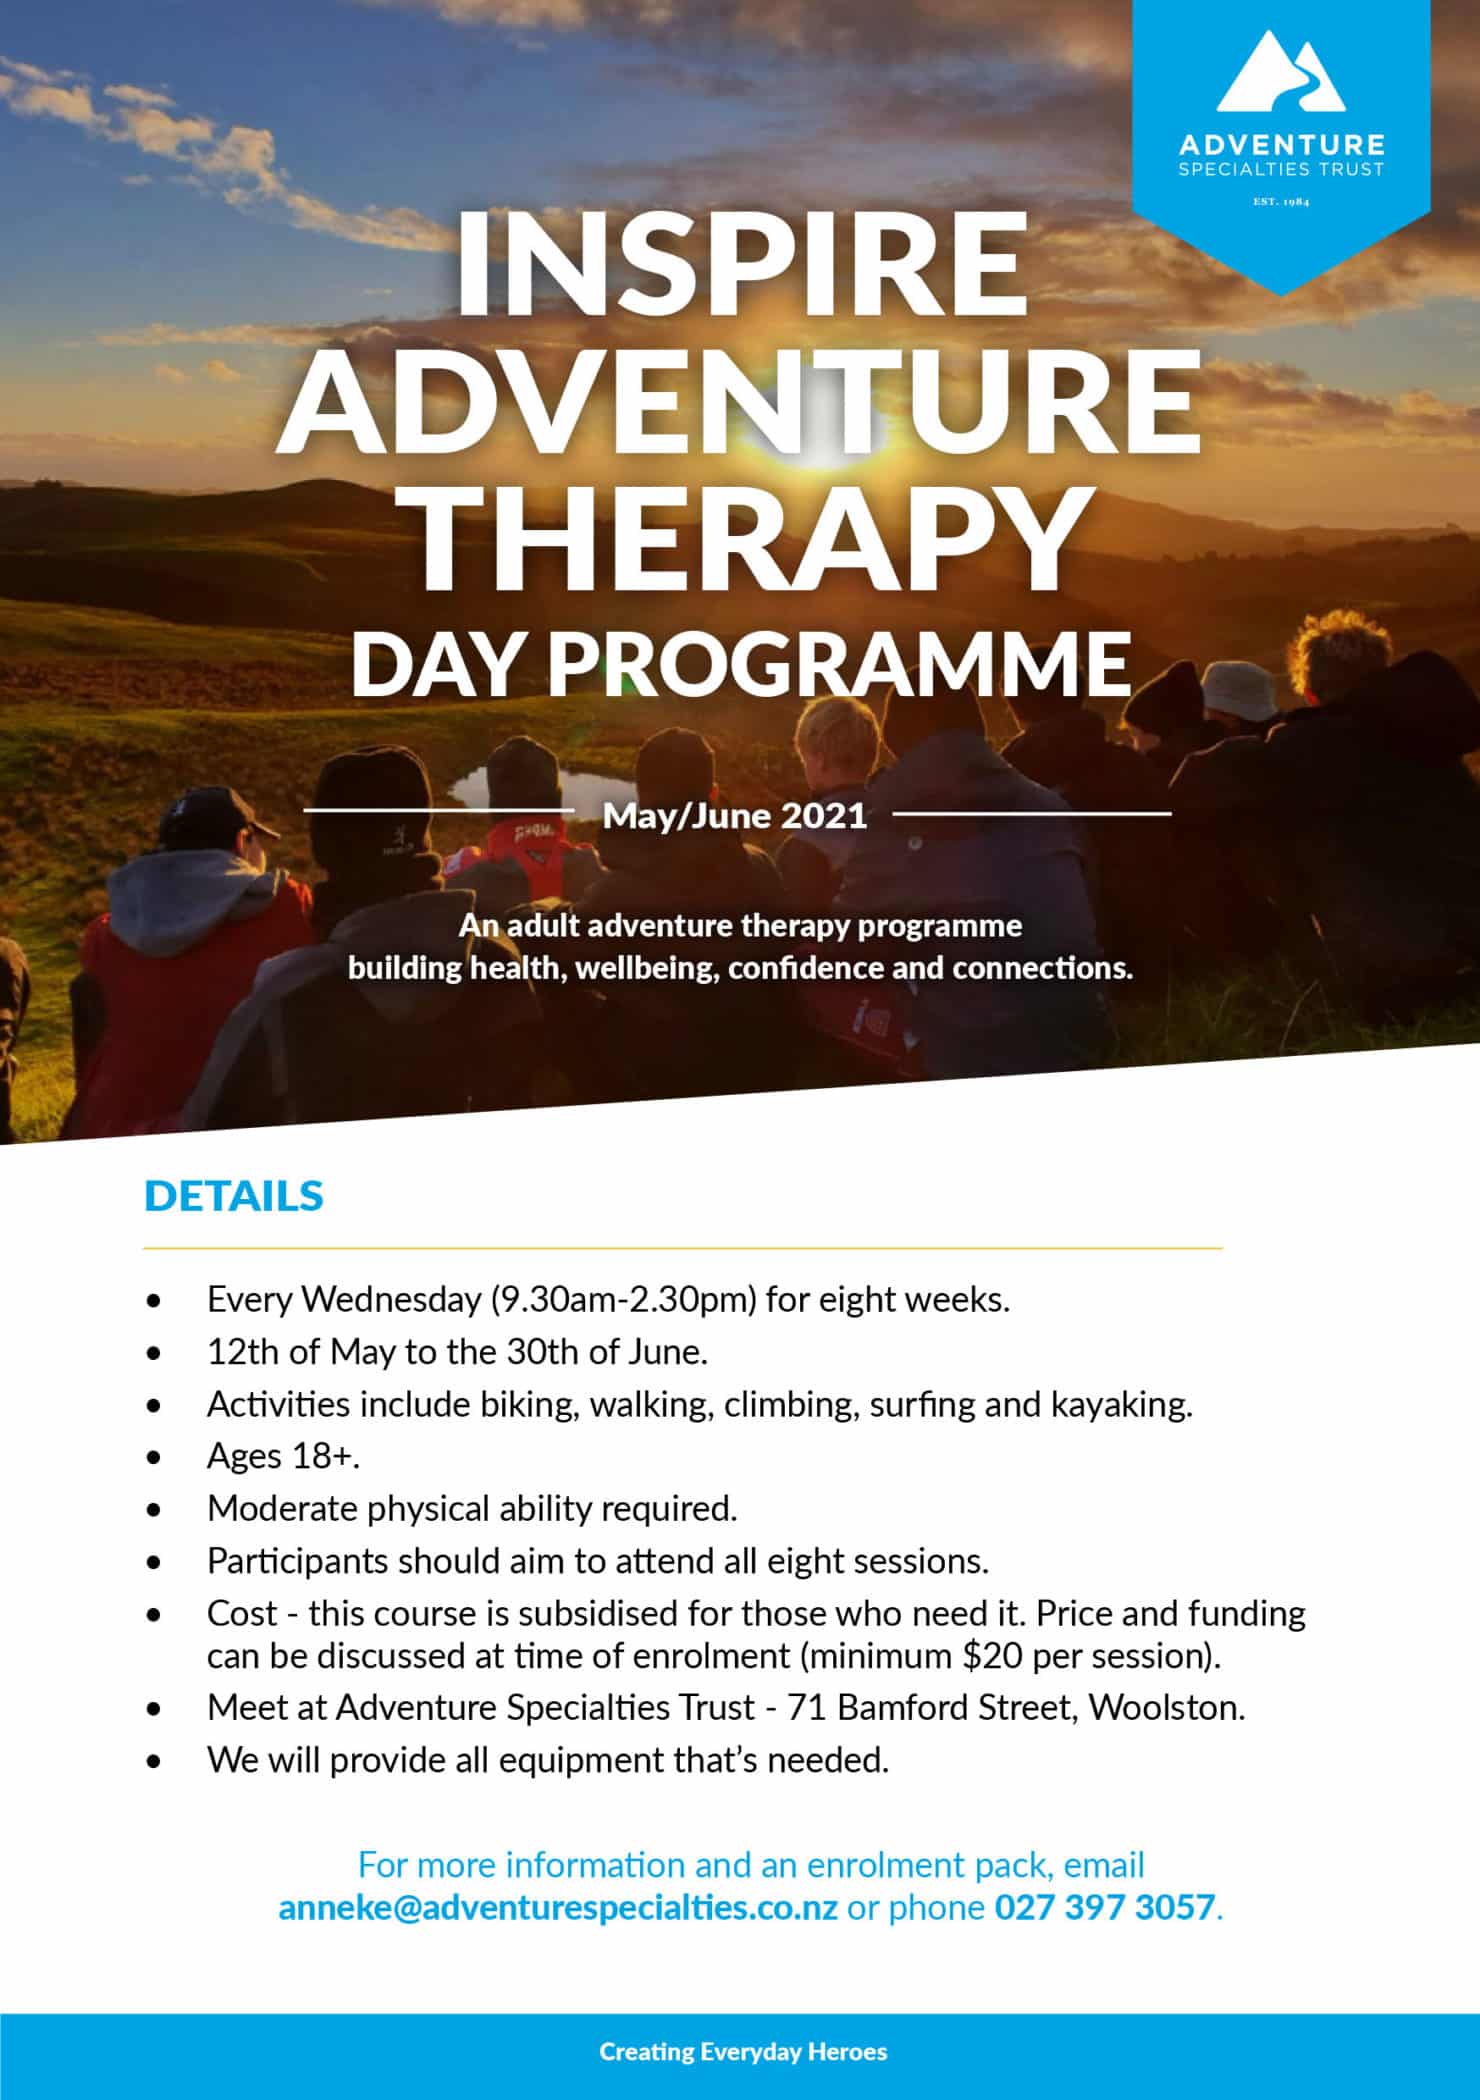 Inspire - adventure therapy programme for adults in Christchurch - May 2021